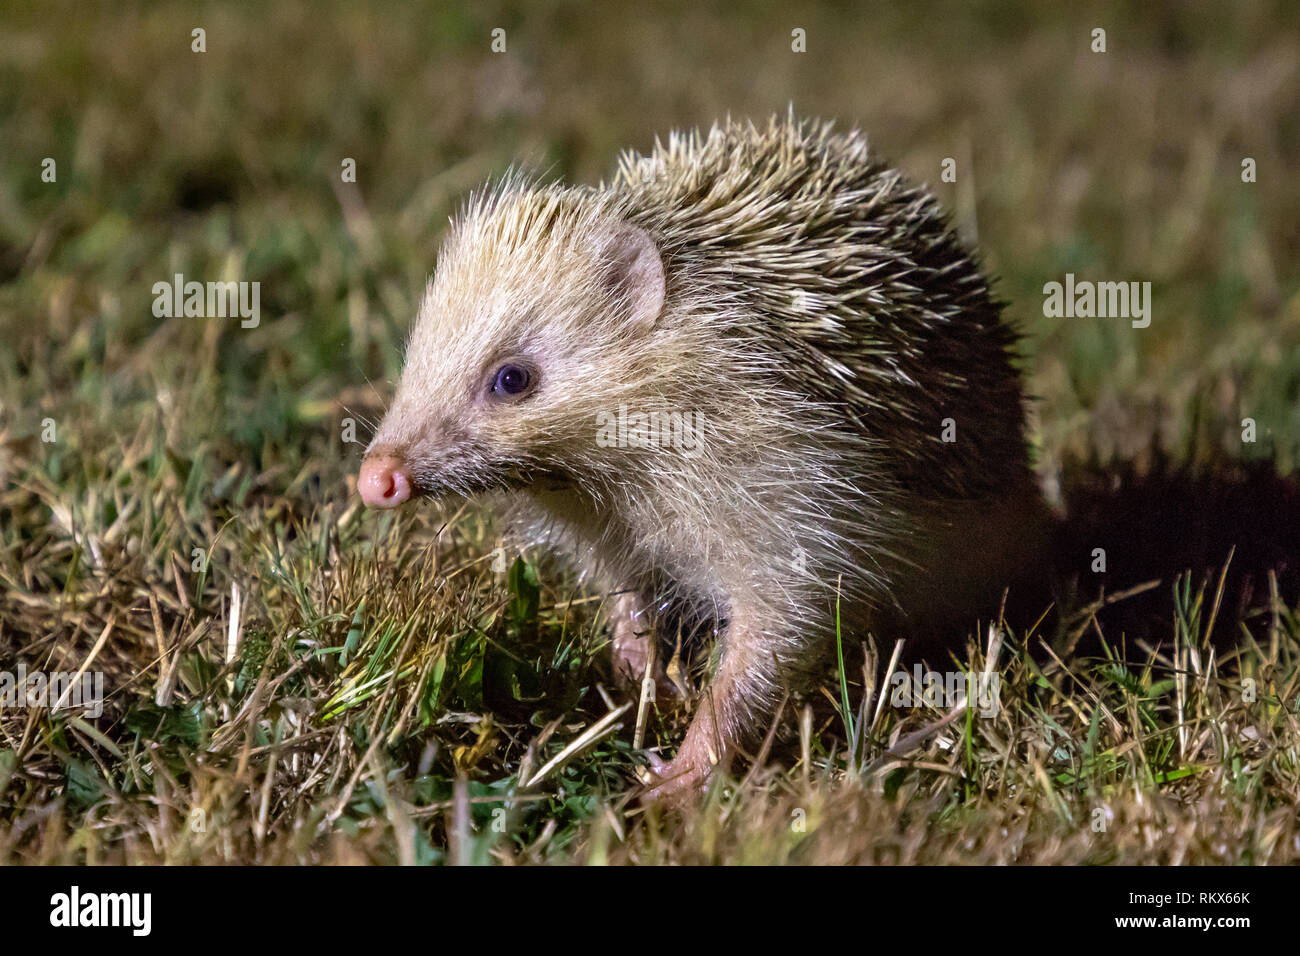 The Alderney Blonde Hedgehog, tame and approachable due to the lack of predation. Stock Photo